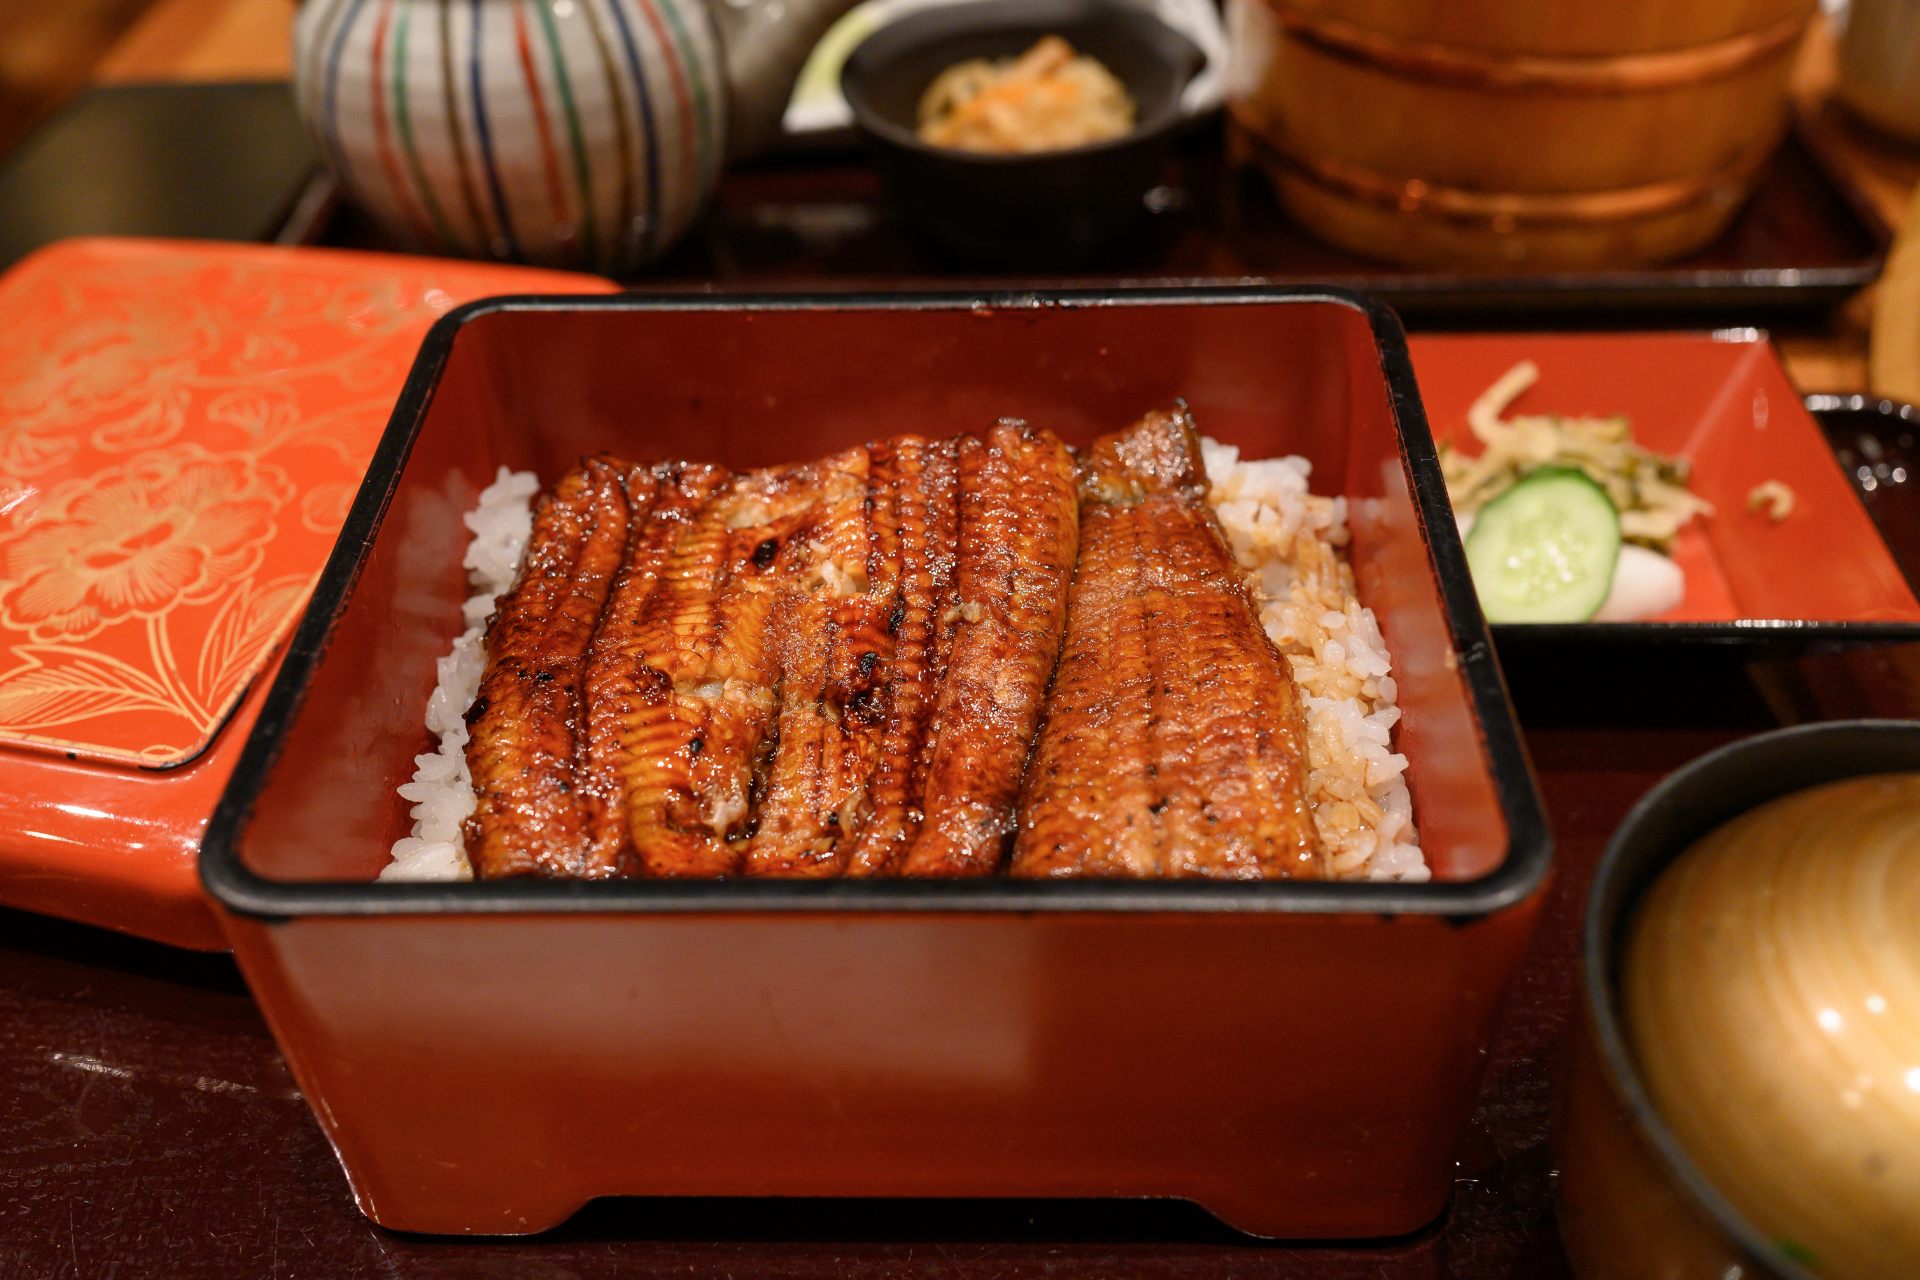 Unaju: eel on rice served in a lacquer box